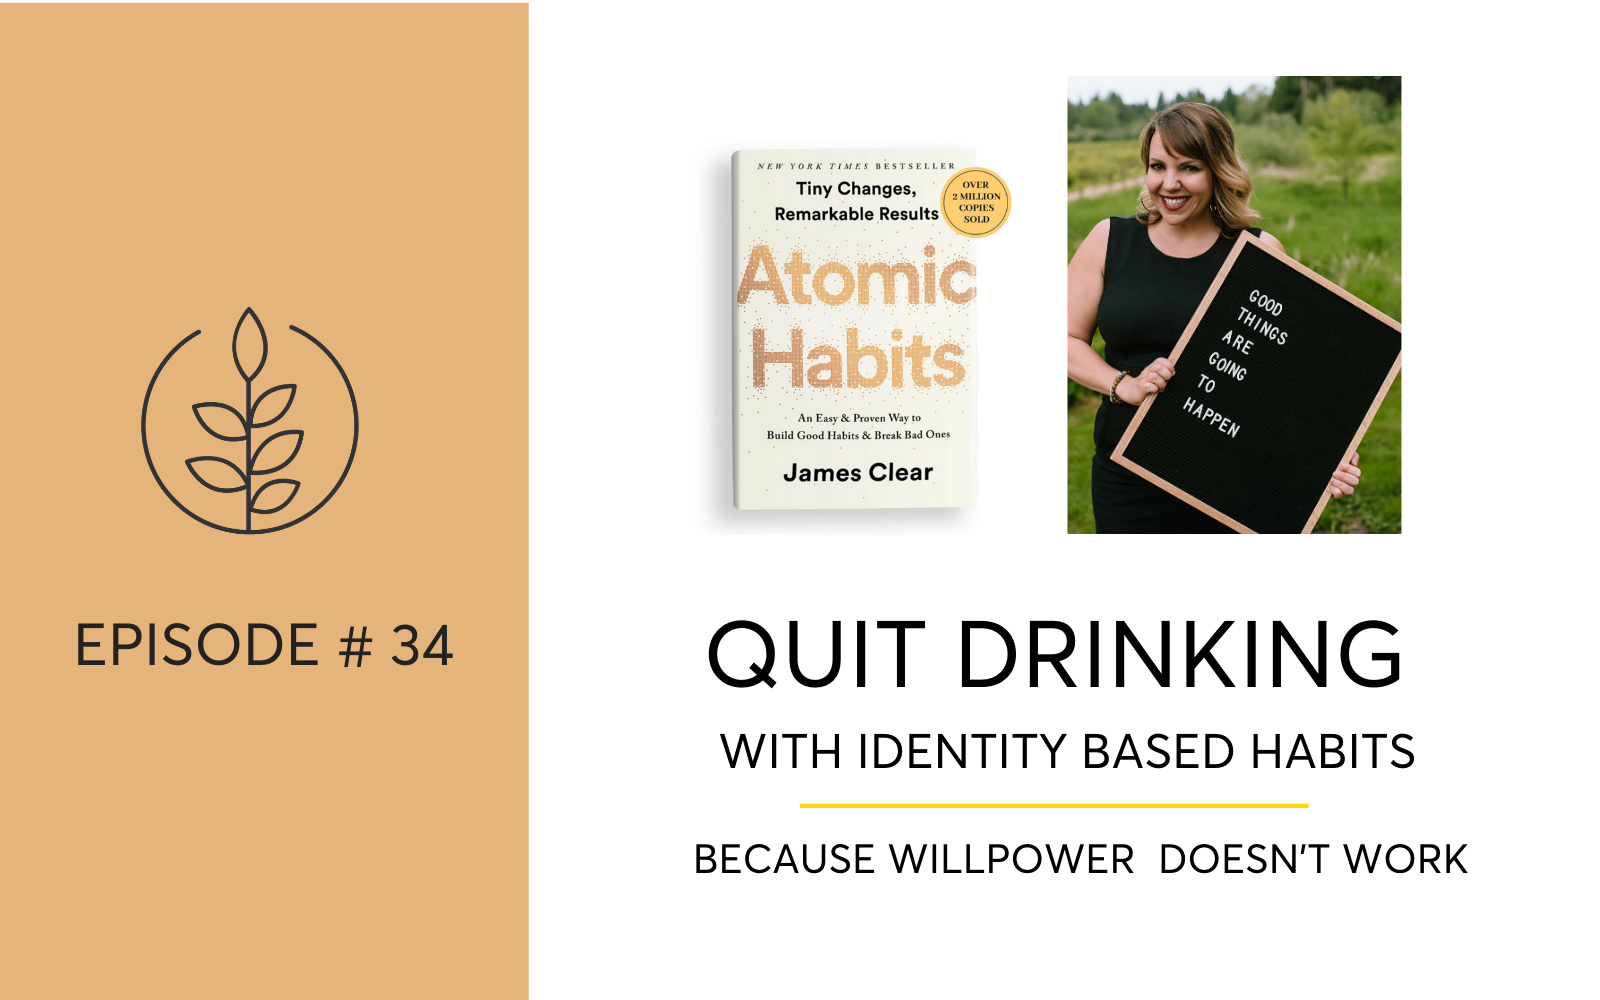 Quit Drinking With Identity Based Habits I Atomic Habits by James Clear